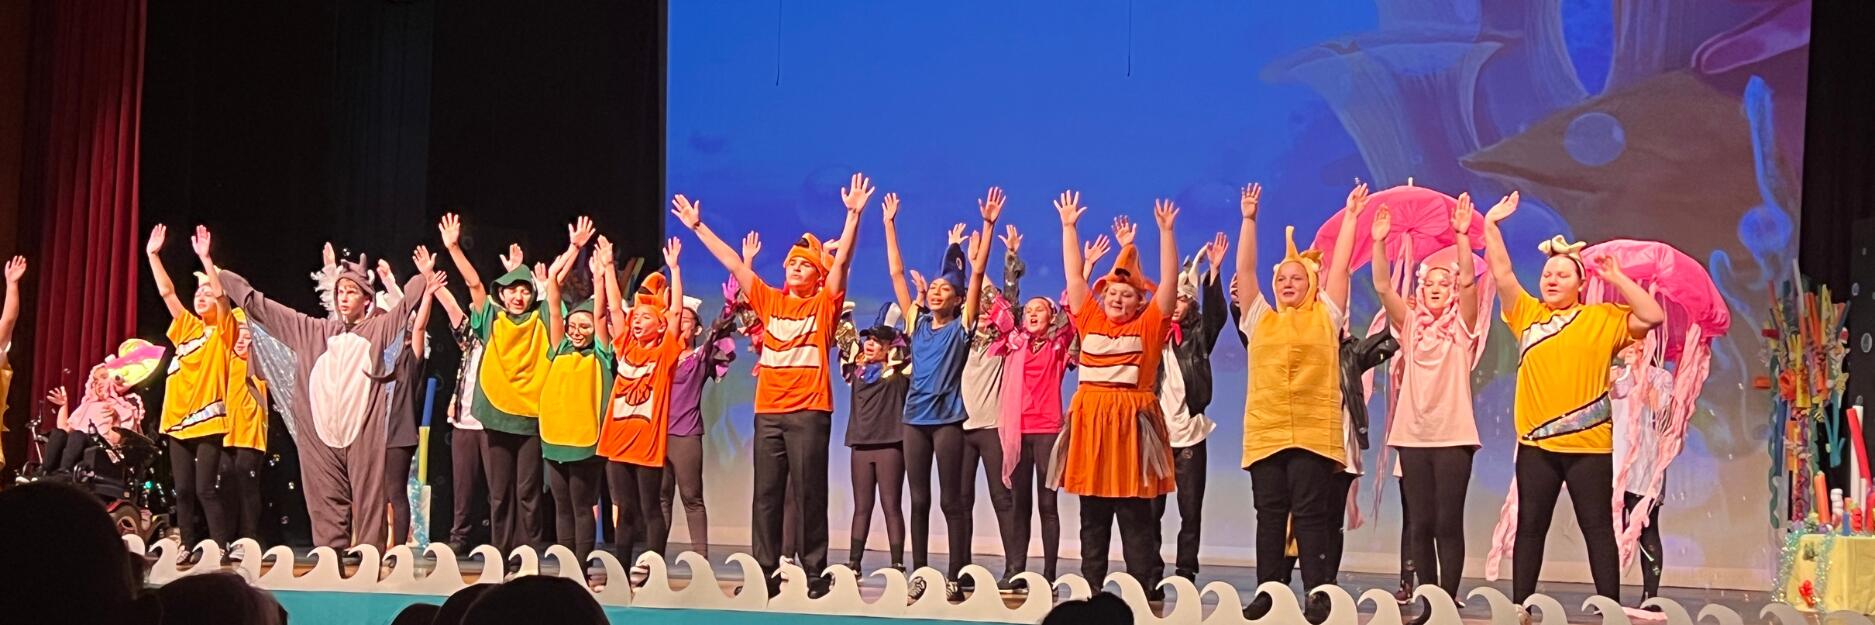 Students dressed as marine animals and fish taking a bow on stage